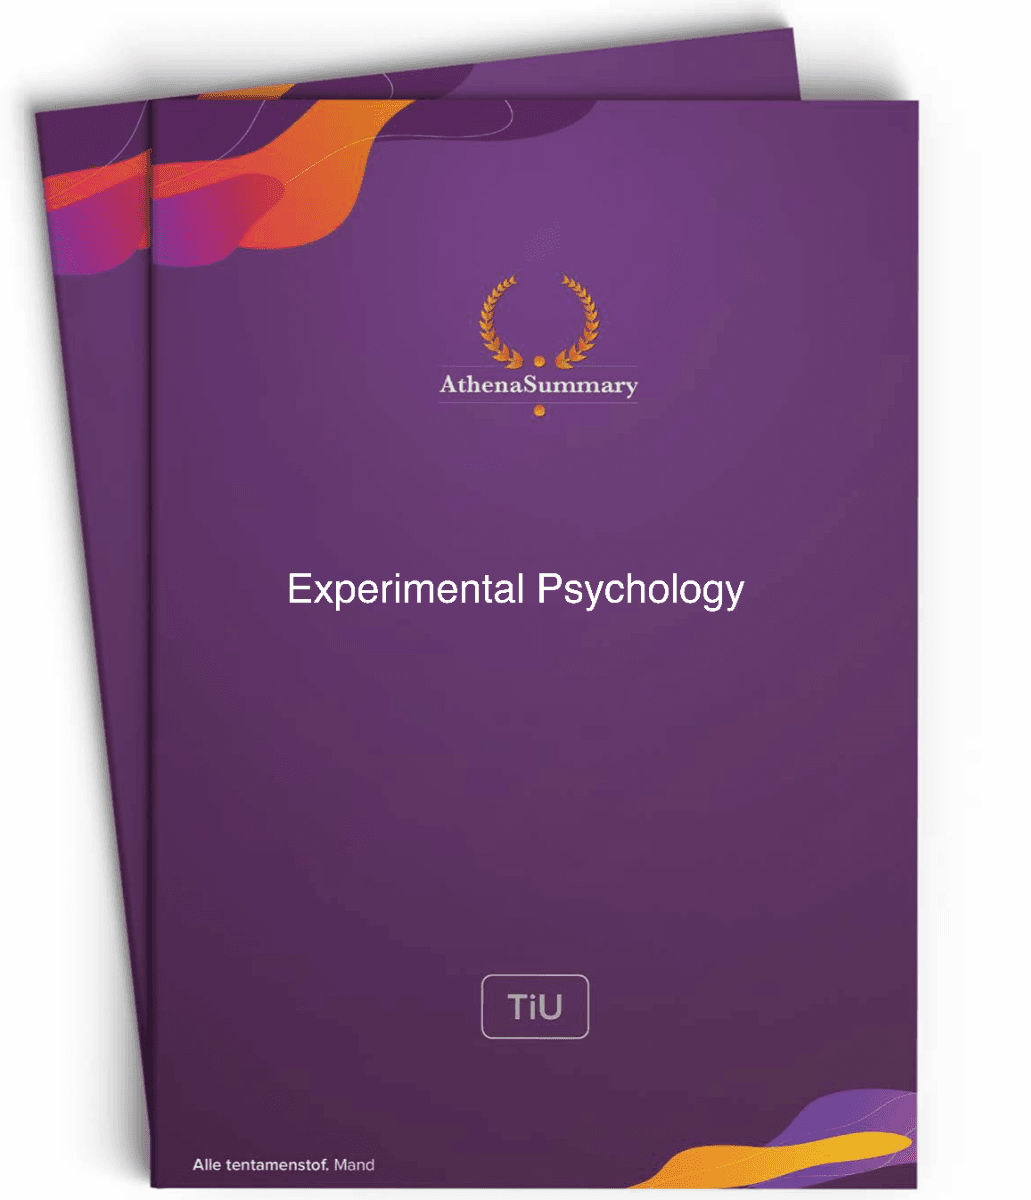 Literature and Lecture Summary: Experimental Psychology